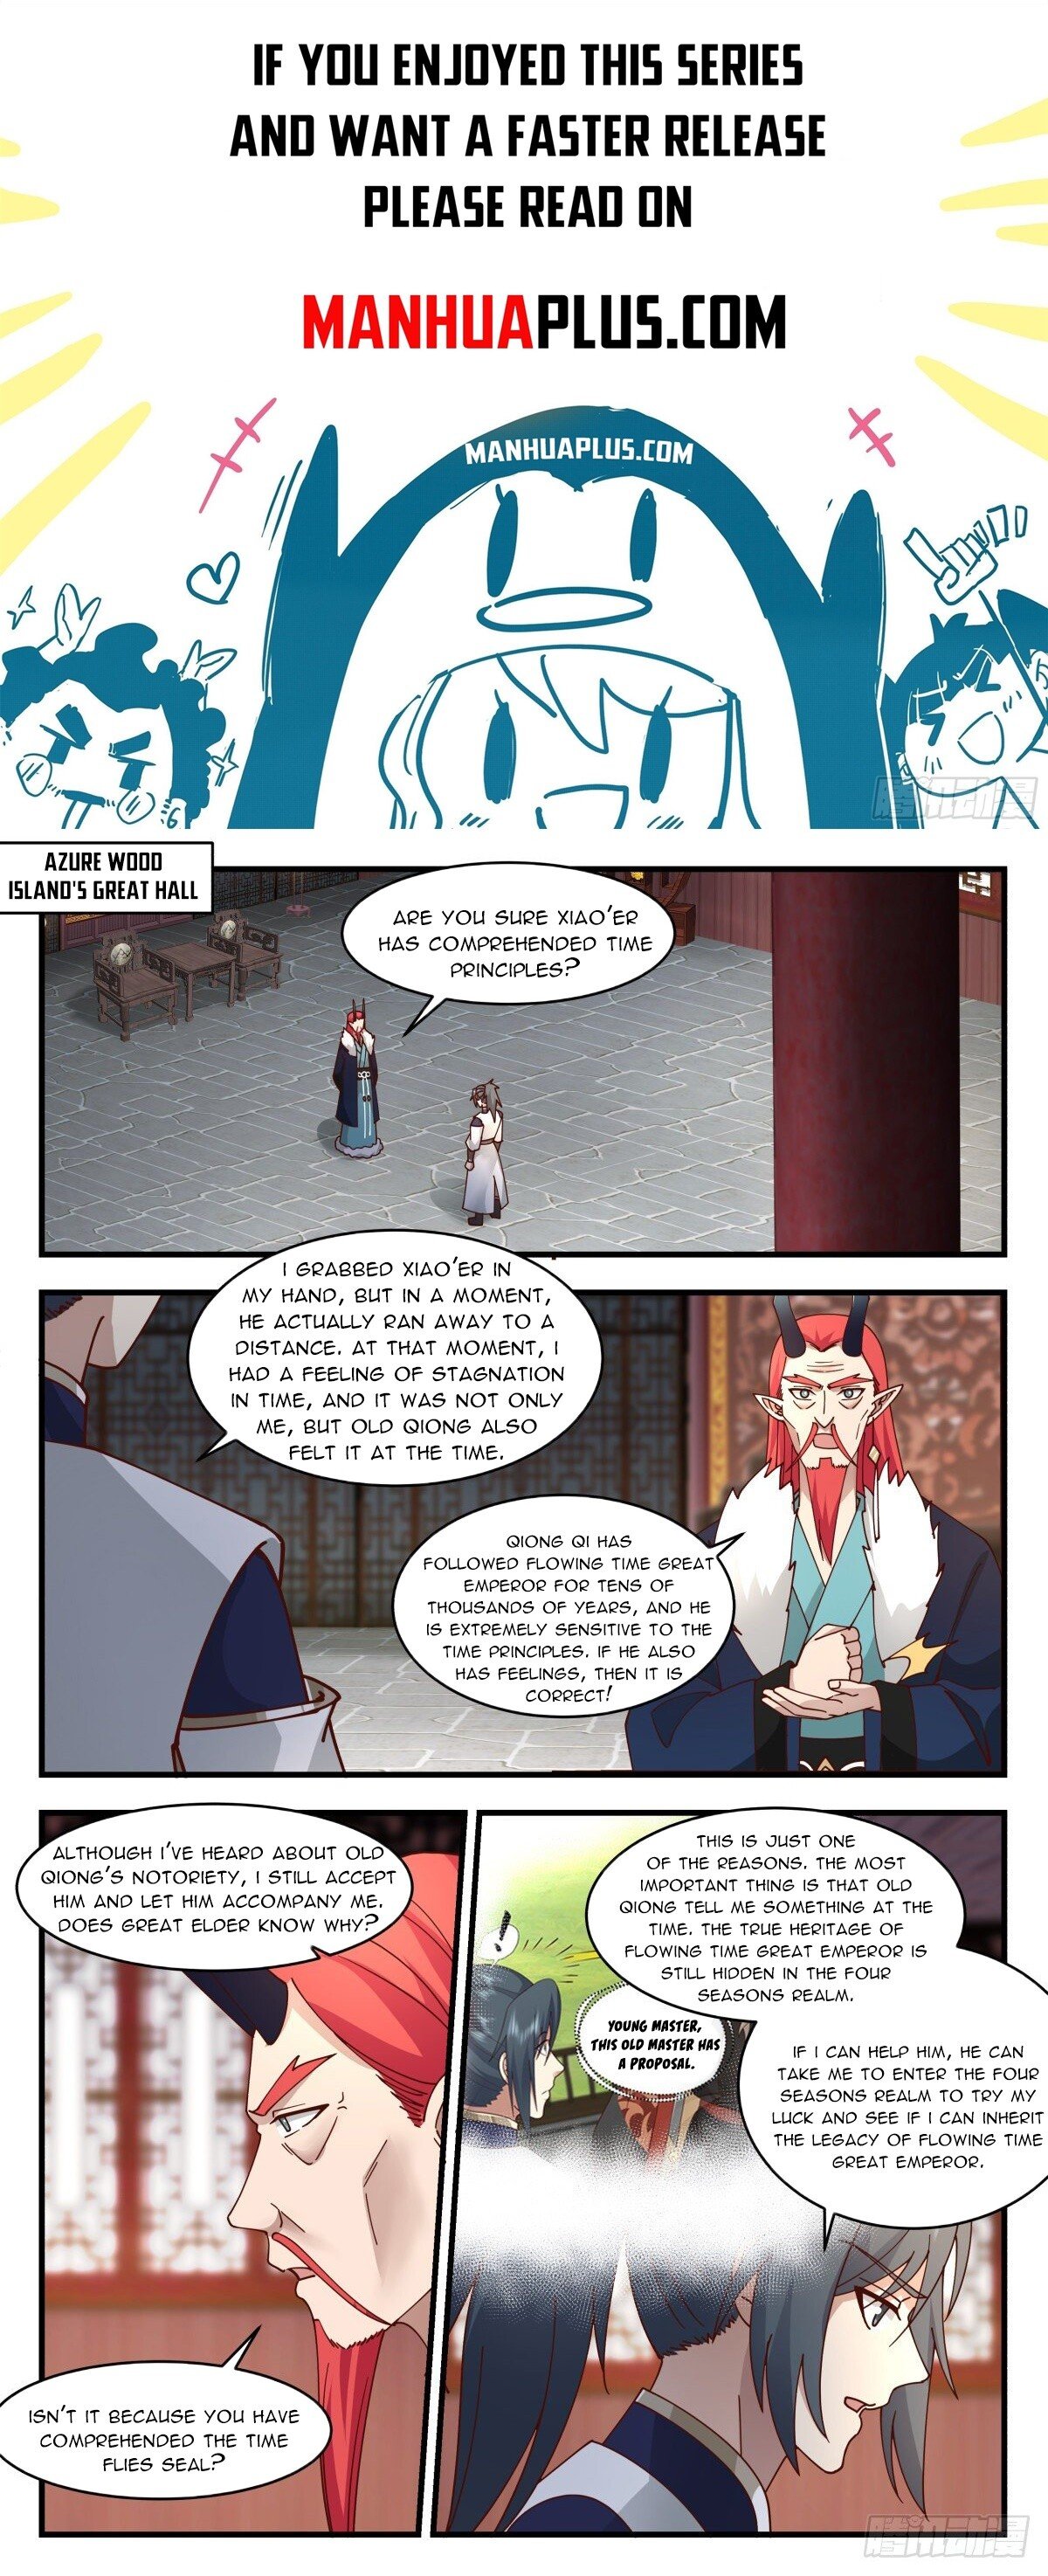 Martial Peak - Chapter 15080 - Gathering the reinforcements - Page 1